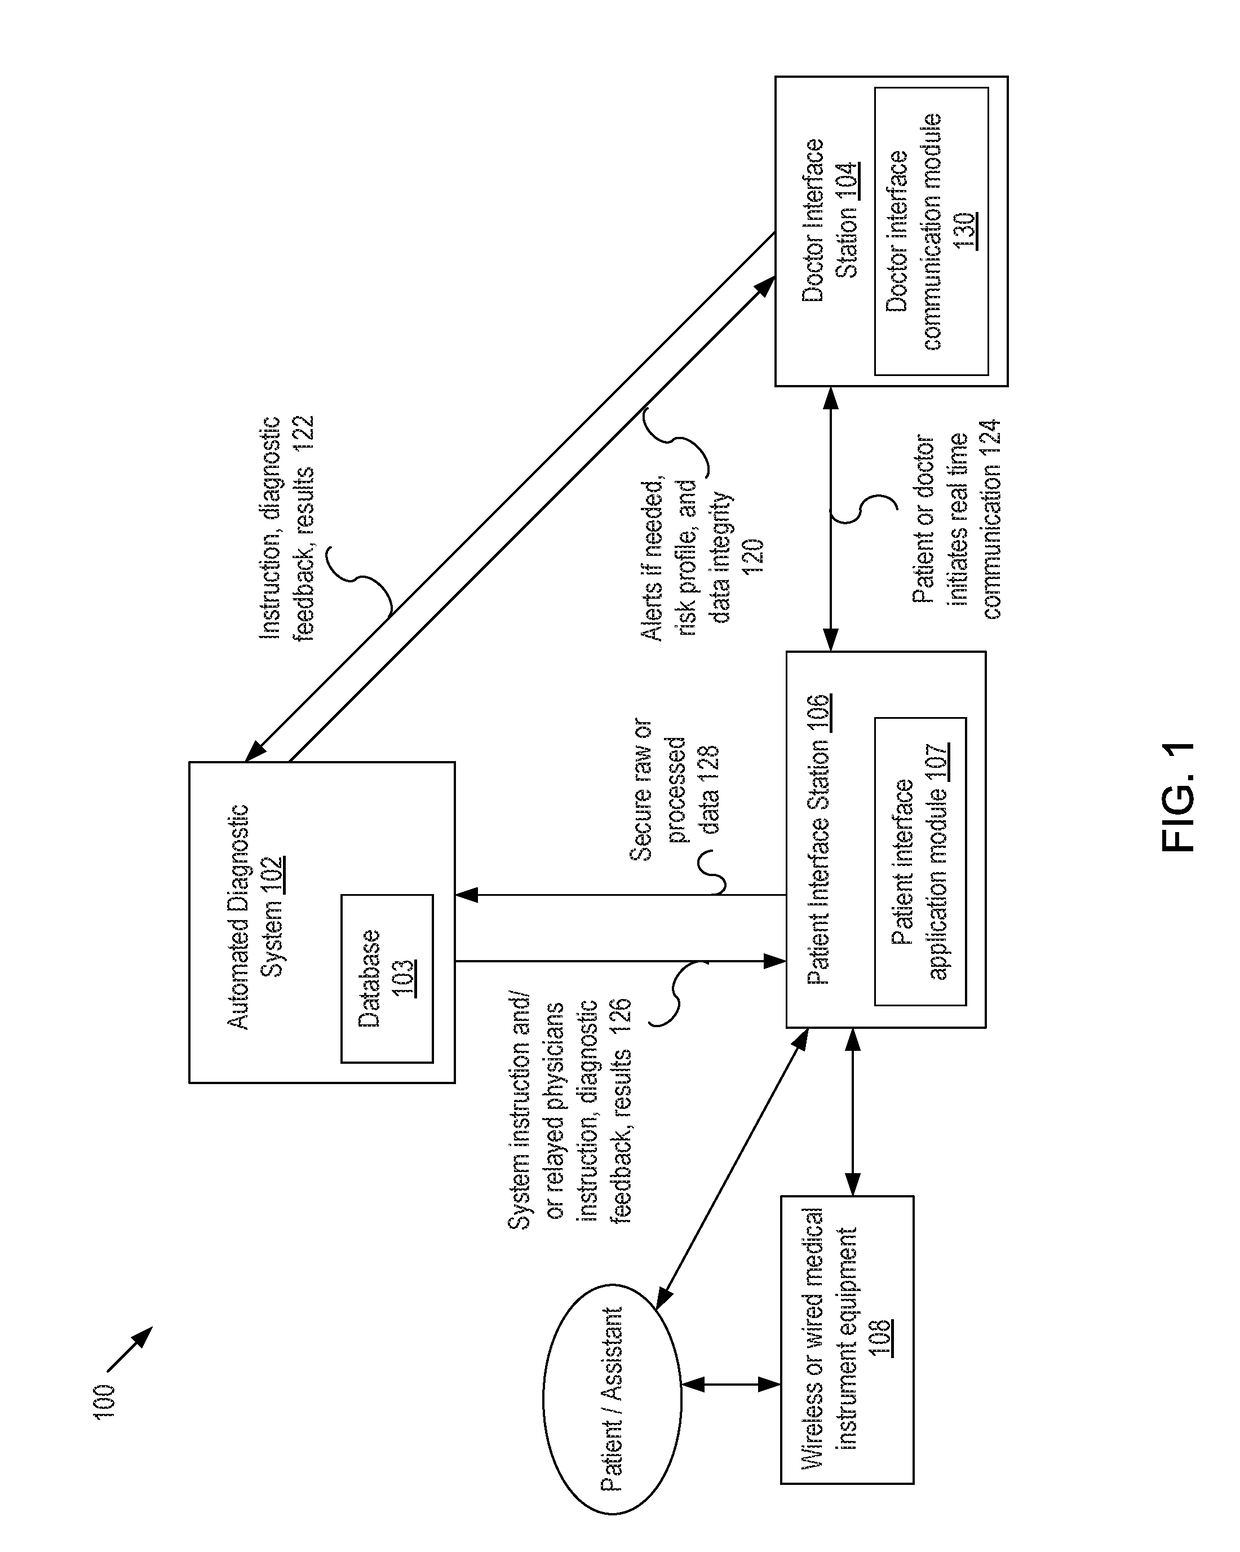 Systems and methods for generating medical diagnosis